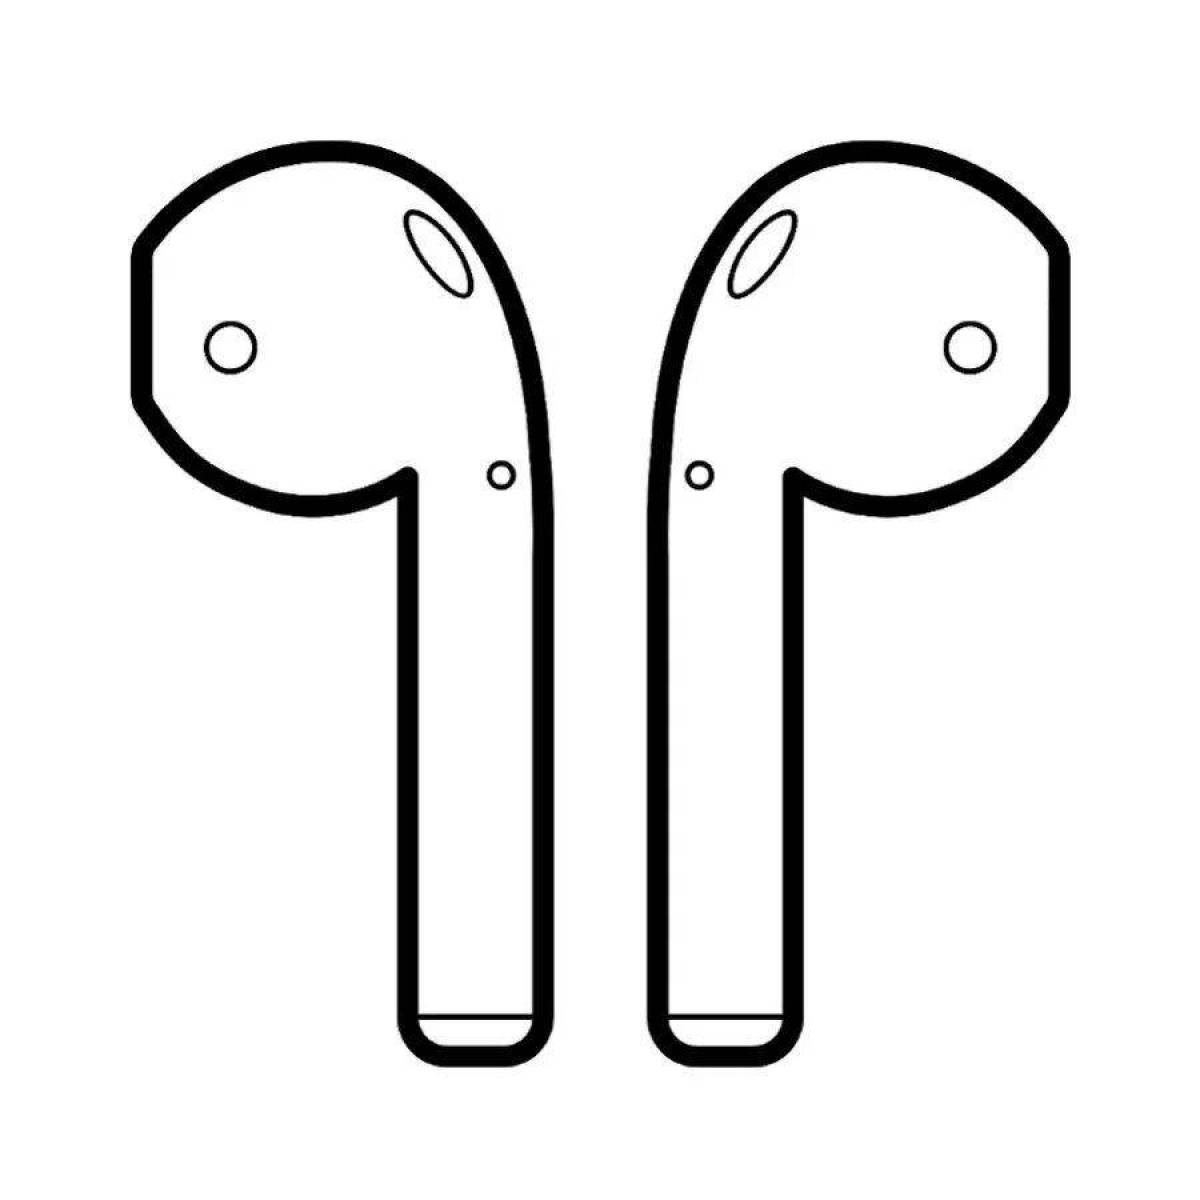 Airpods creative coloring book